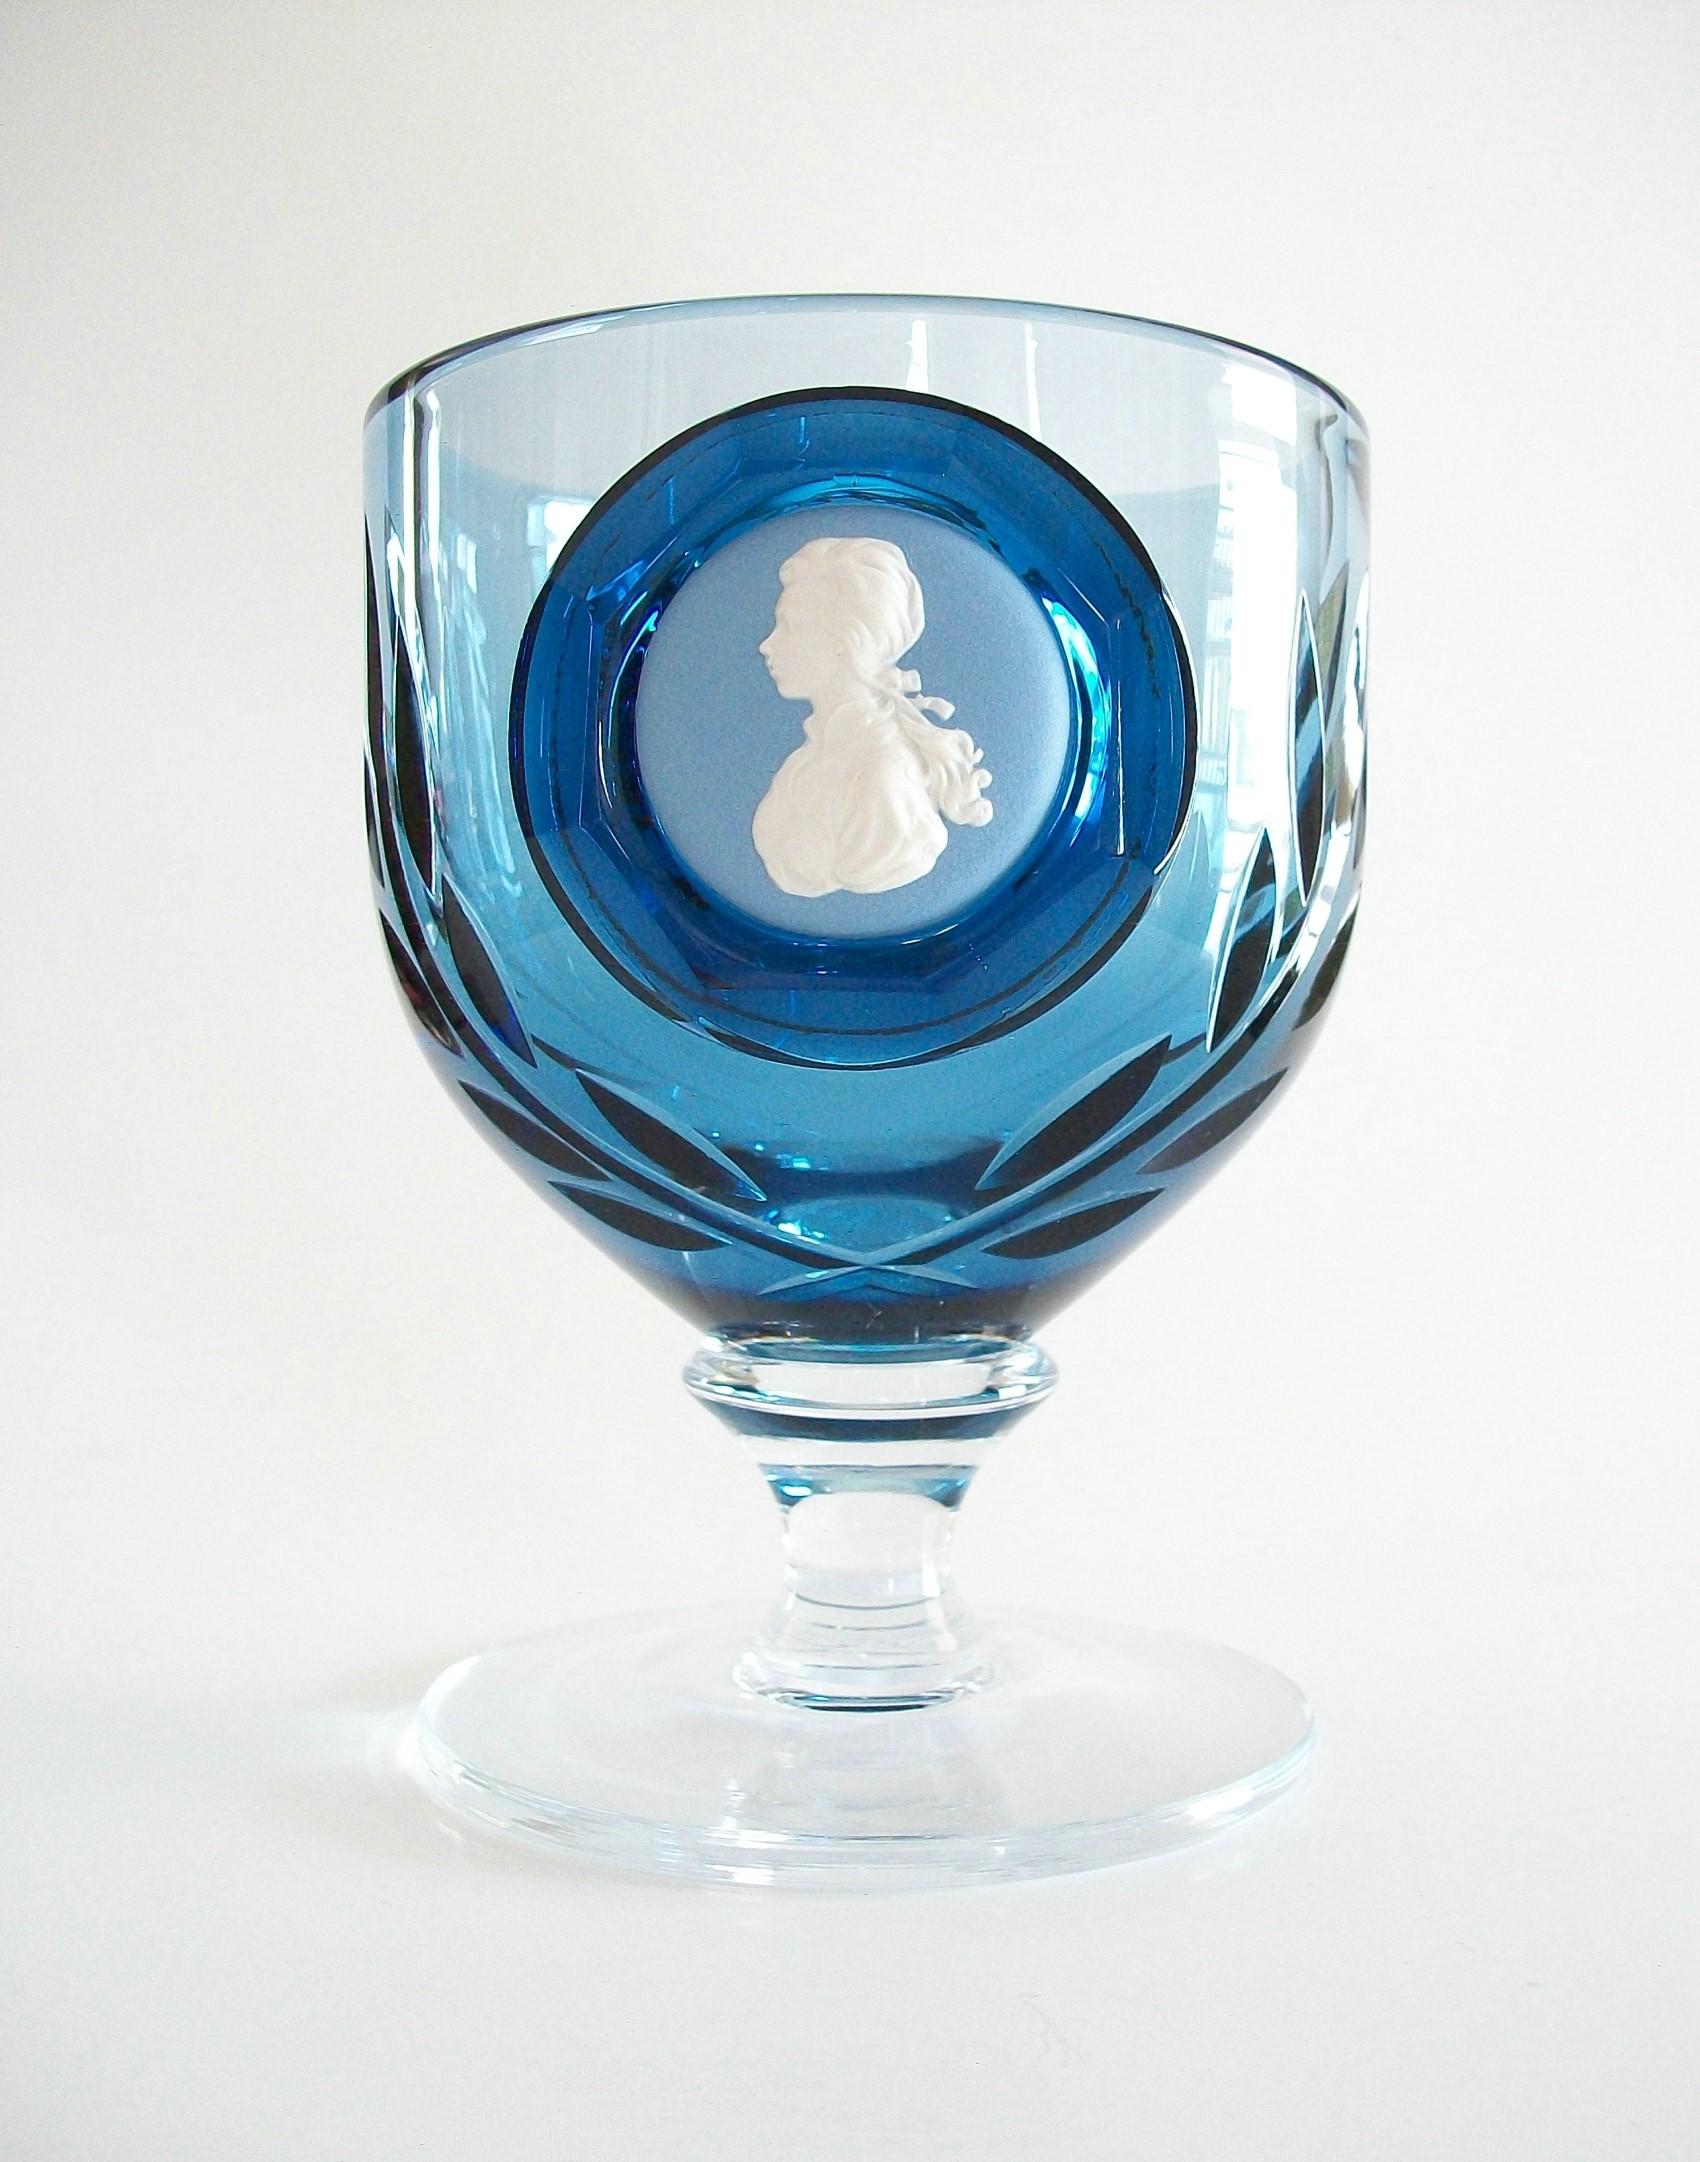 Neoclassical Wedgwood, 'Princess Anne' Goblet with Jasperware Medallion, Signed, UK, 1973 For Sale